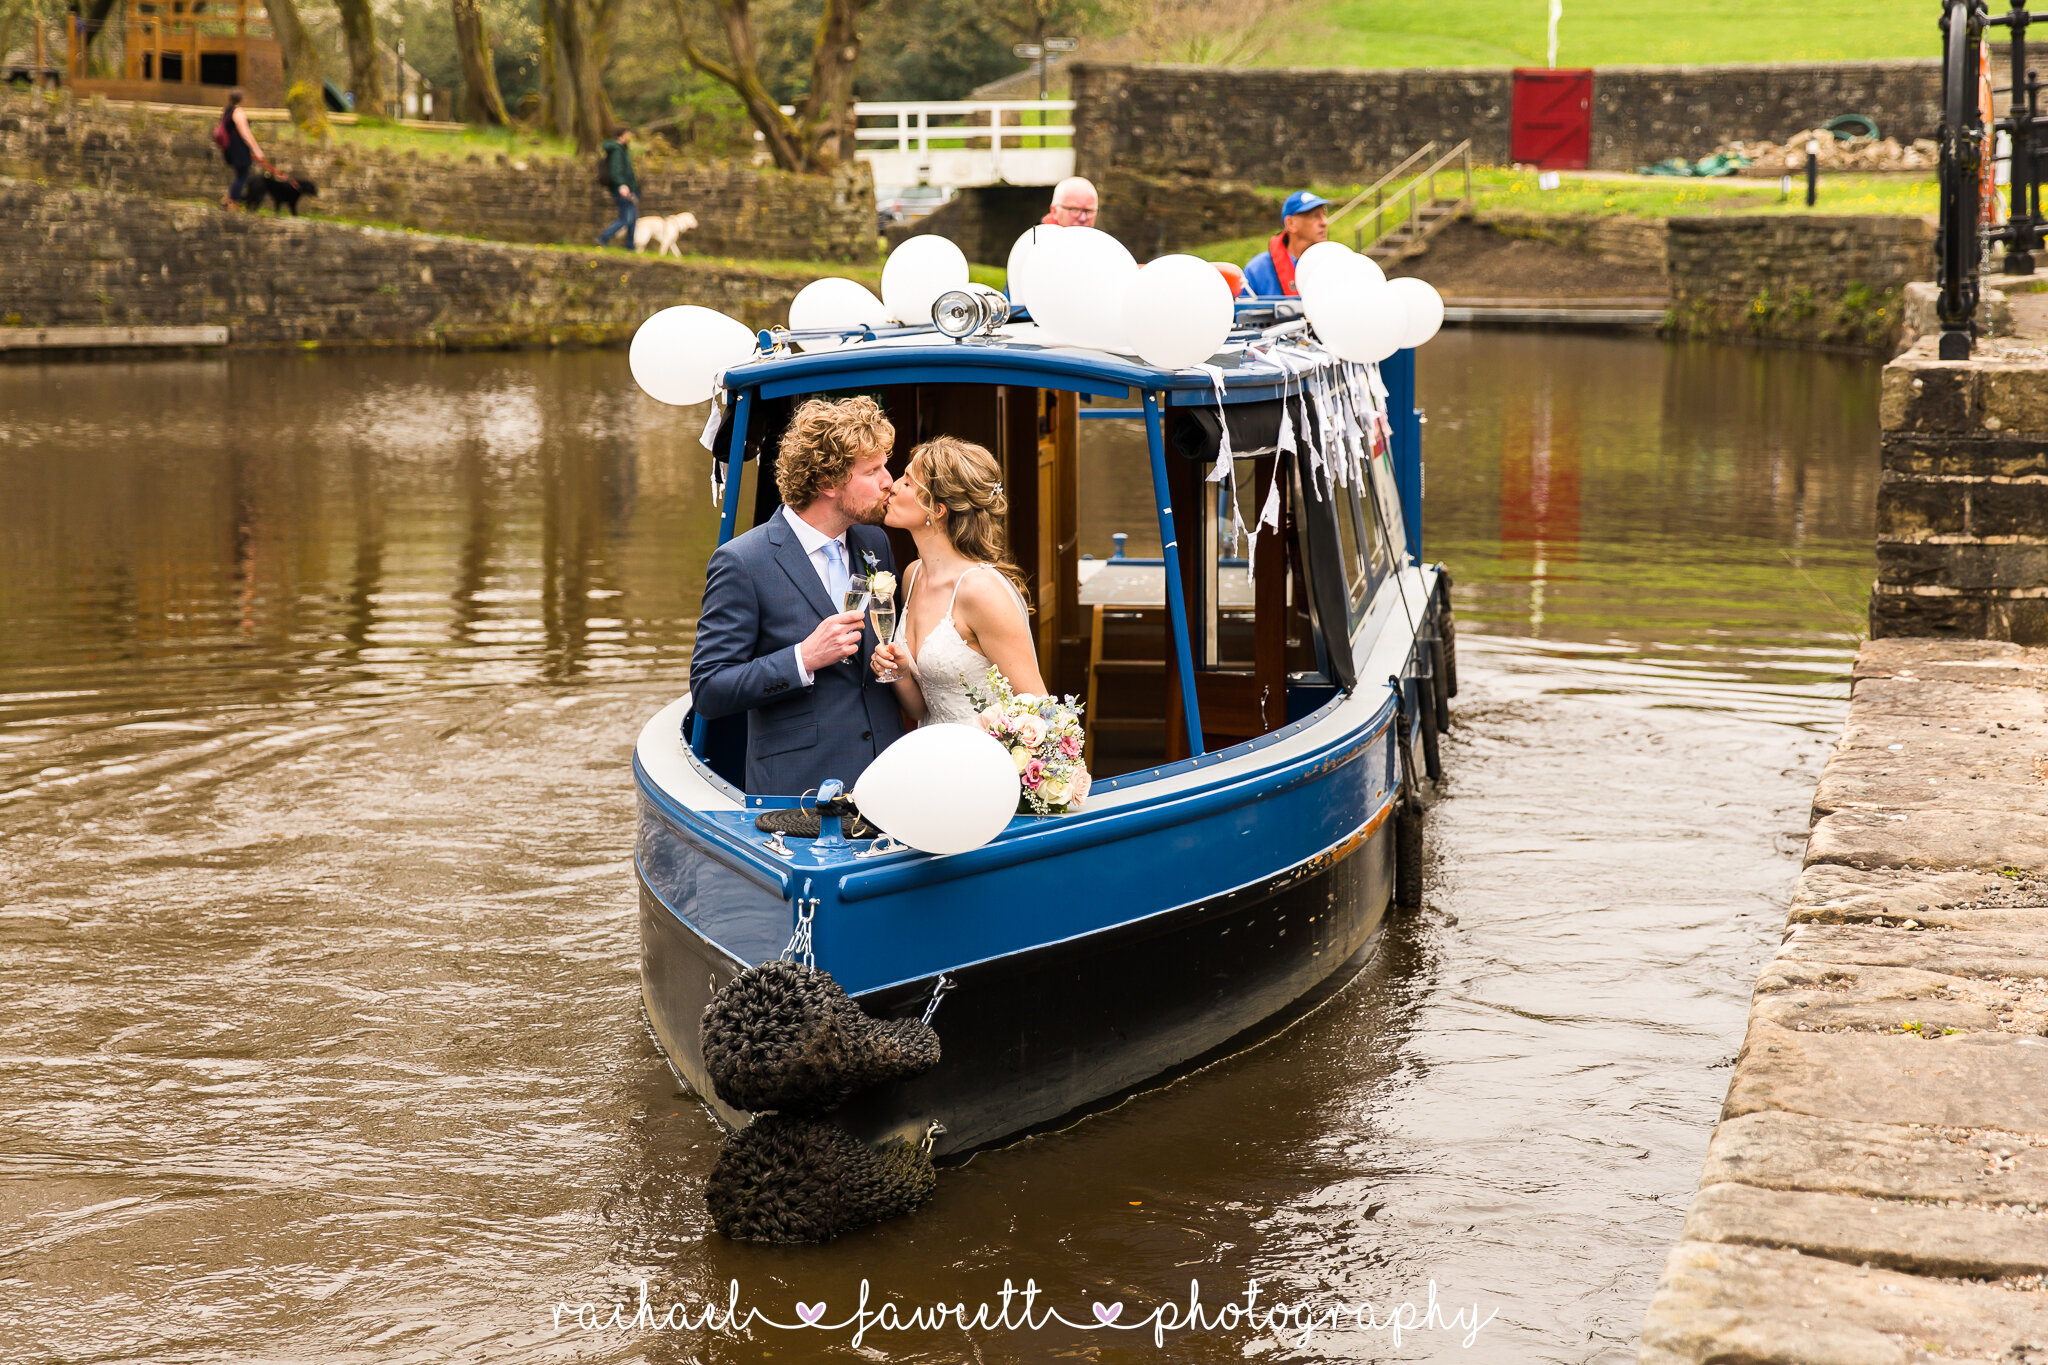 🤍 Mr &amp; Mrs Tienstra 🤍

The loveliest Bride and Groom, the happiest guests, gorgeous venue, a ceilidh, a canal boat and the most colourful confetti shot ever = EPIC WEDDING. Congratulations Sam and Robbie! 😍😘

#standedgetunnelwedding #harrogat